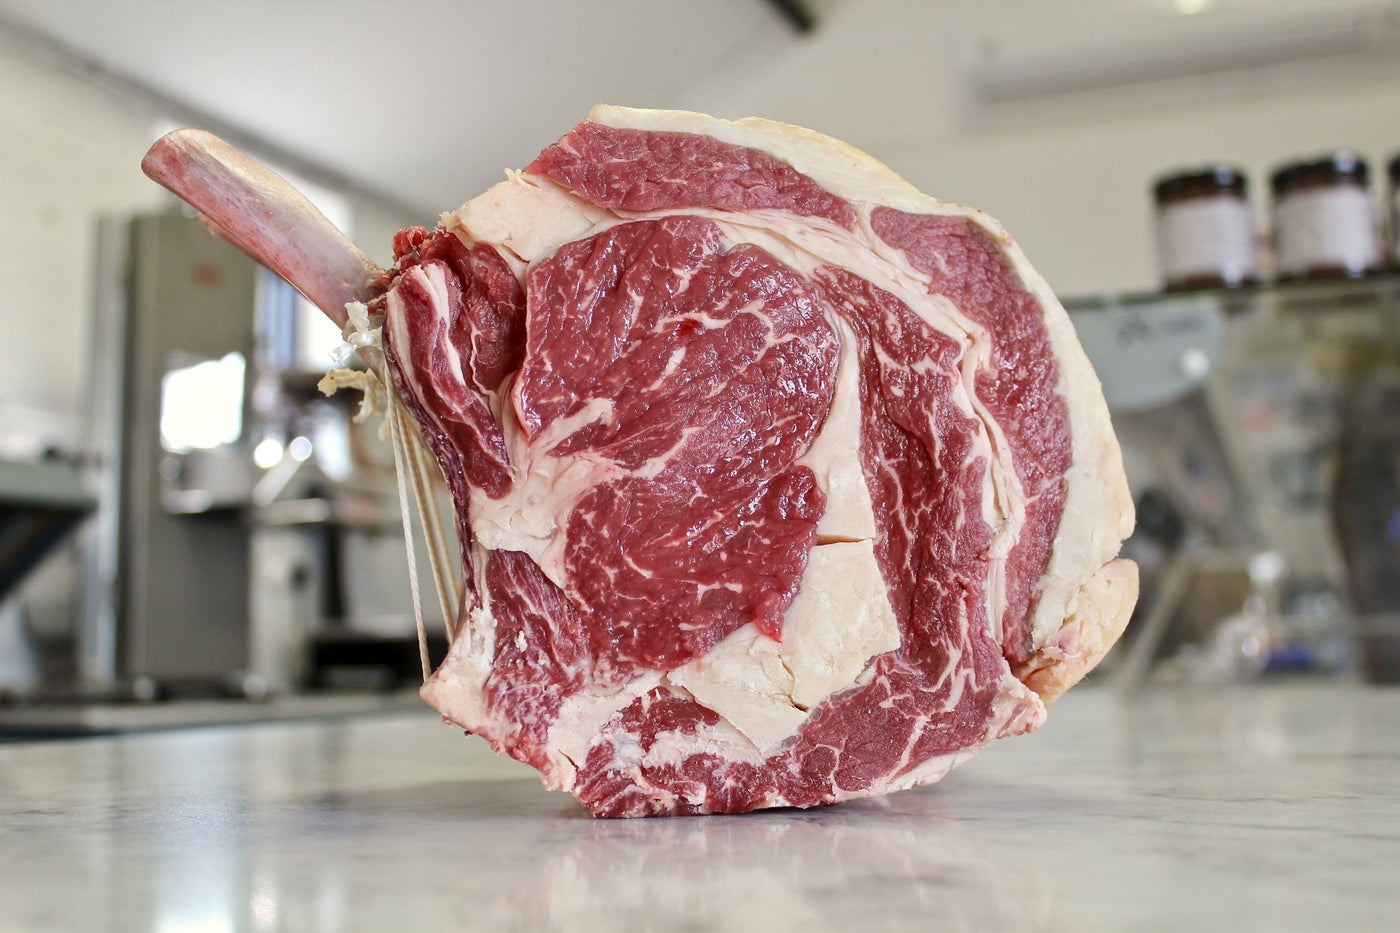 Xmas French Trimmed Fore-Rib, Grass Fed Dry-Aged - Thomas Joseph Butchery - Ethical Dry-Aged Meat The Best Steak UK Thomas Joseph Butchery